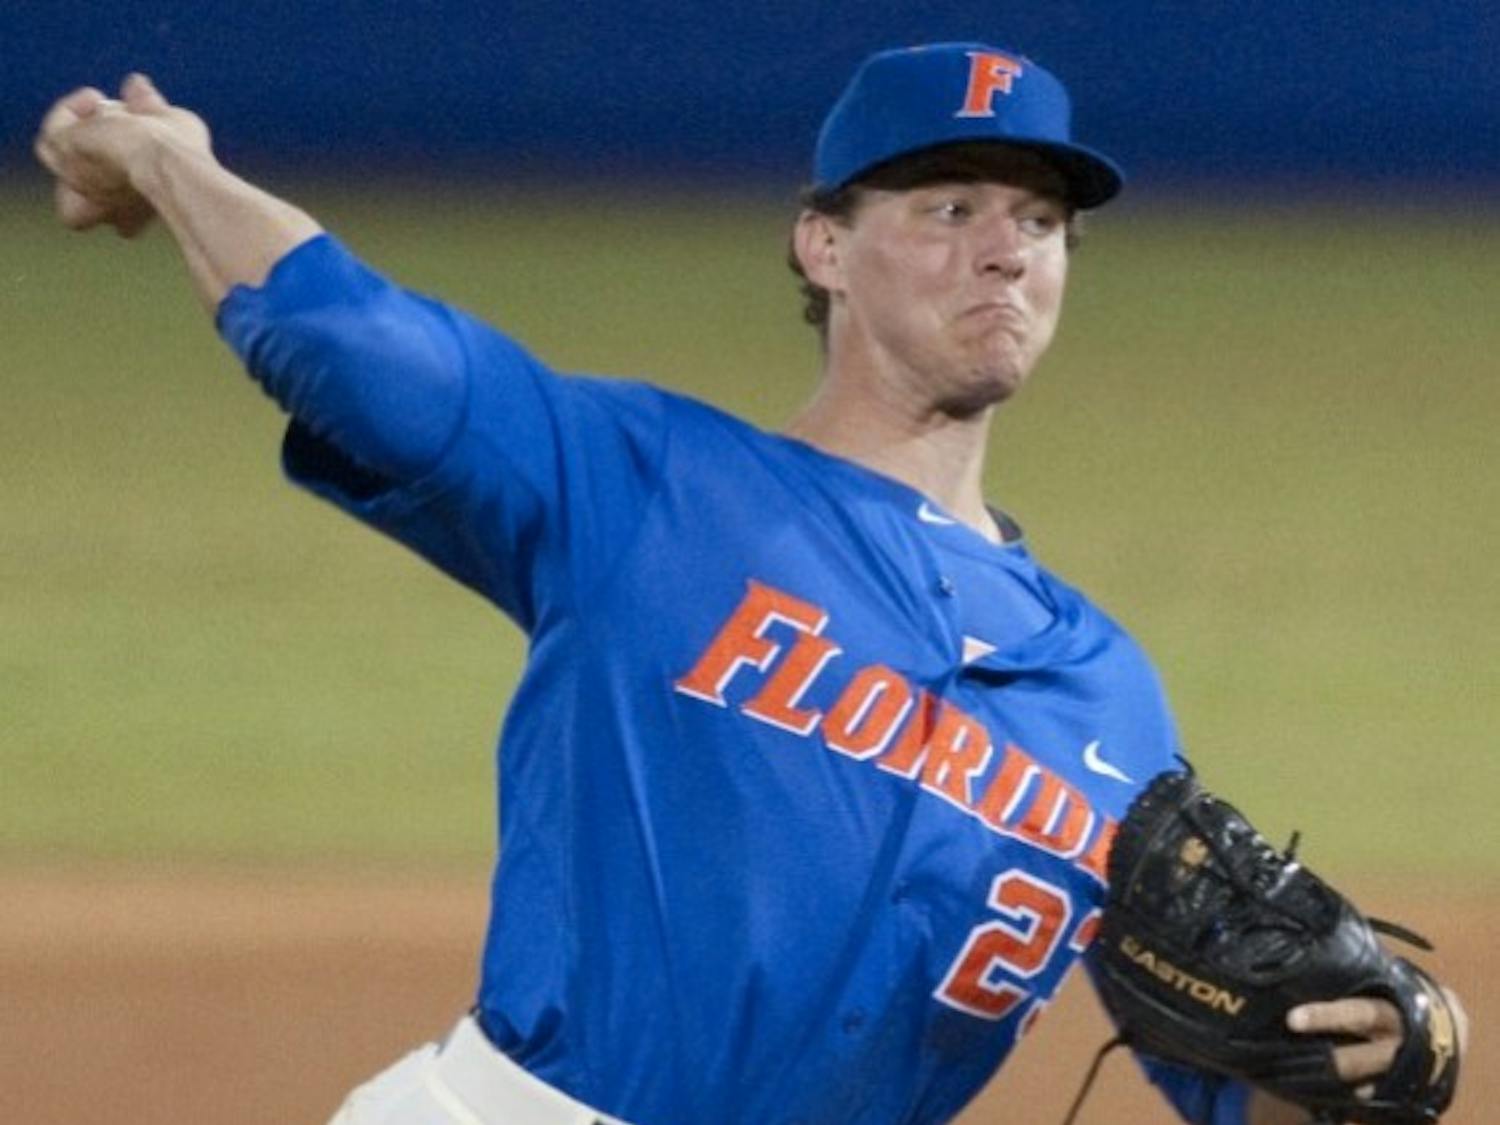 In his first start as a Gator, sophomore Jonathon Crawford tossed five scoreless innings while striking out four and allowing just two hits. Florida beat UCF 8-0 on Wednesday.